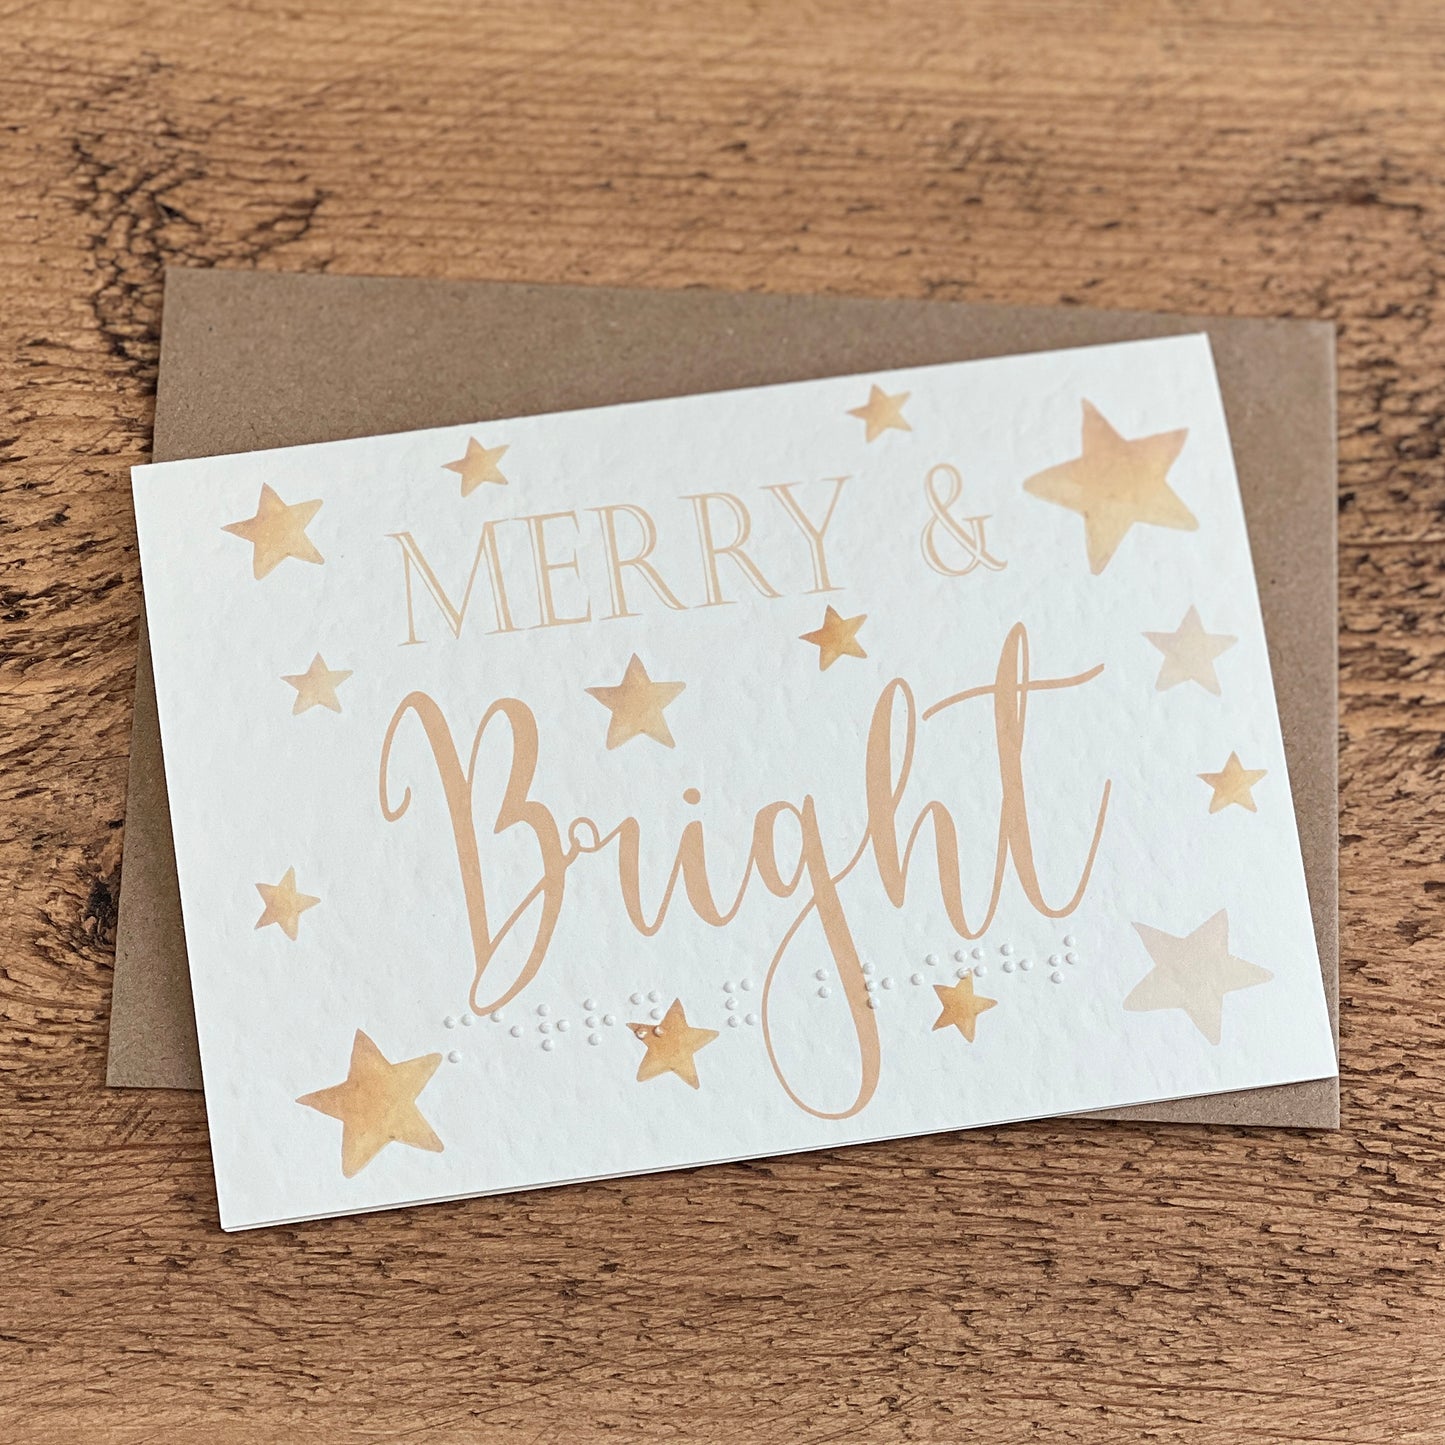 A textured white card with Merry & Bright written in a gold font with stars around the card, the same text is written in braille along the bottom.